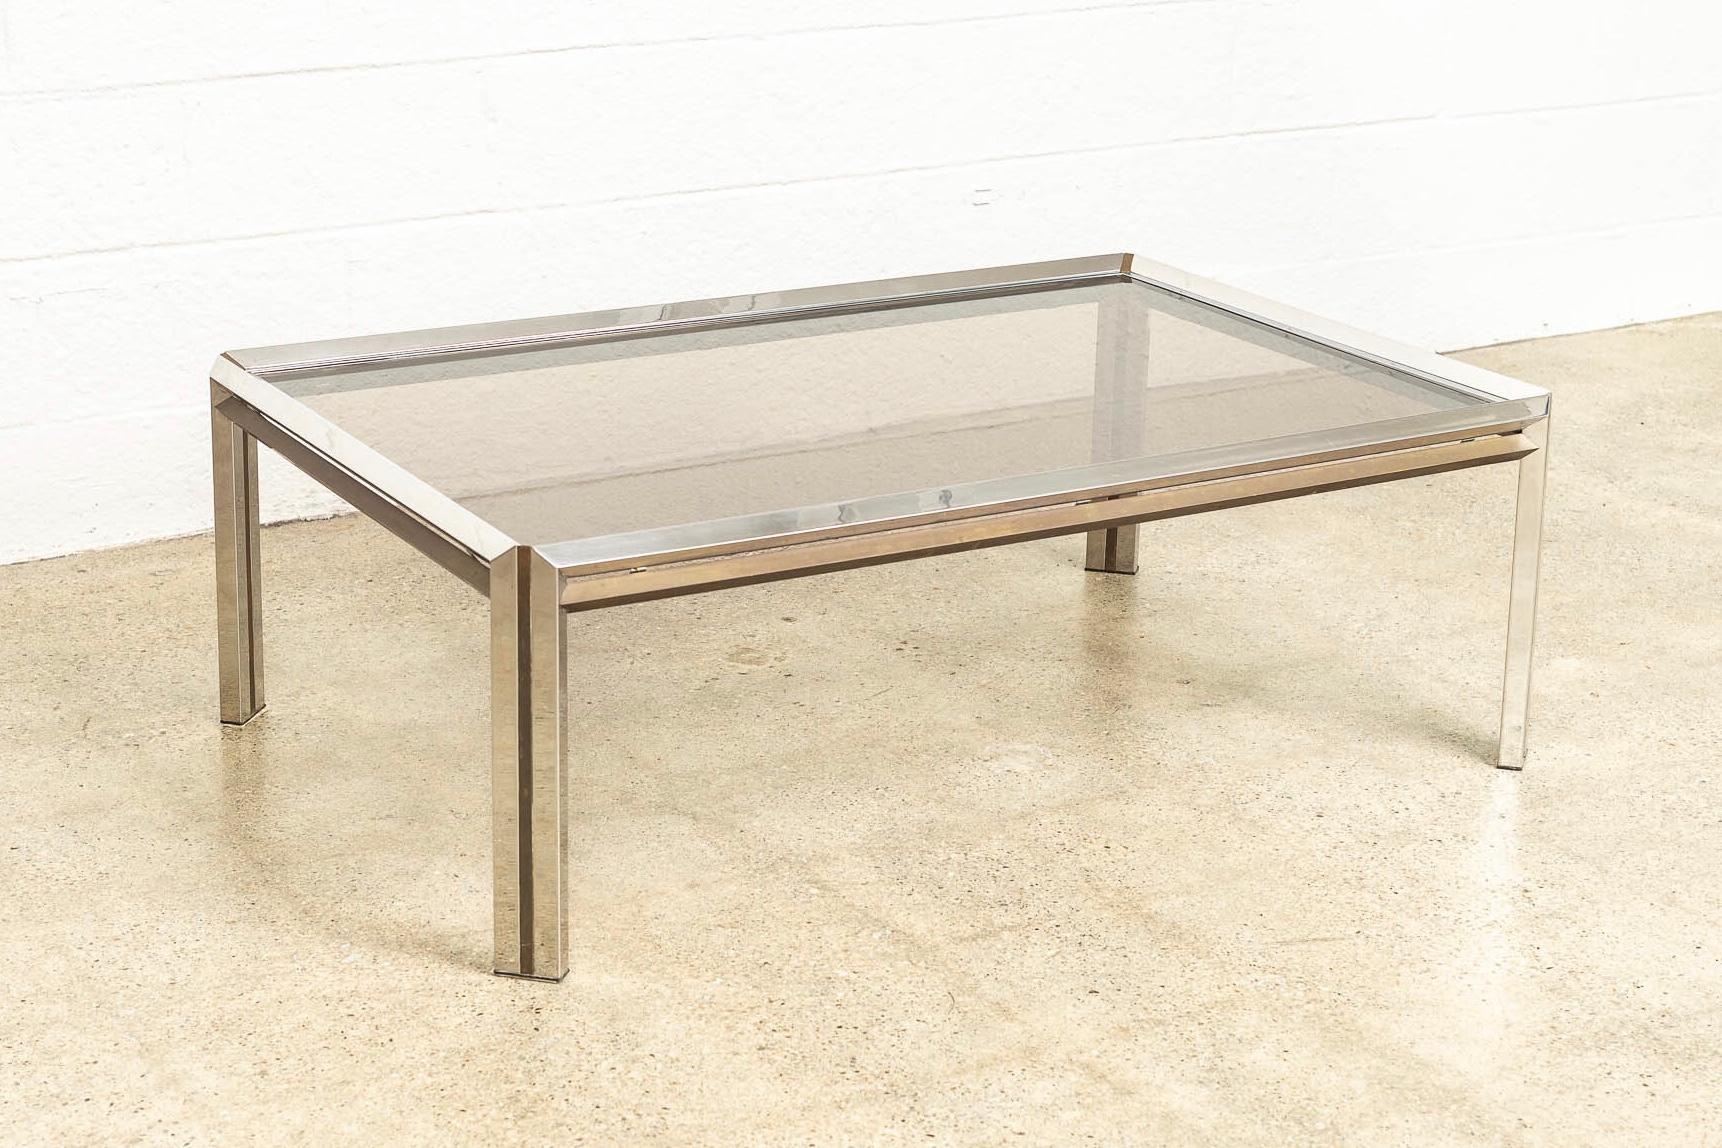 This Vintage Mid-Century Modern chrome, brass and glass rectangular coffee table in the style of Milo Baughman is circa 1970. The unique design features a faceted chrome frame accented by solid brass side bars and inlaid brass striped legs. The